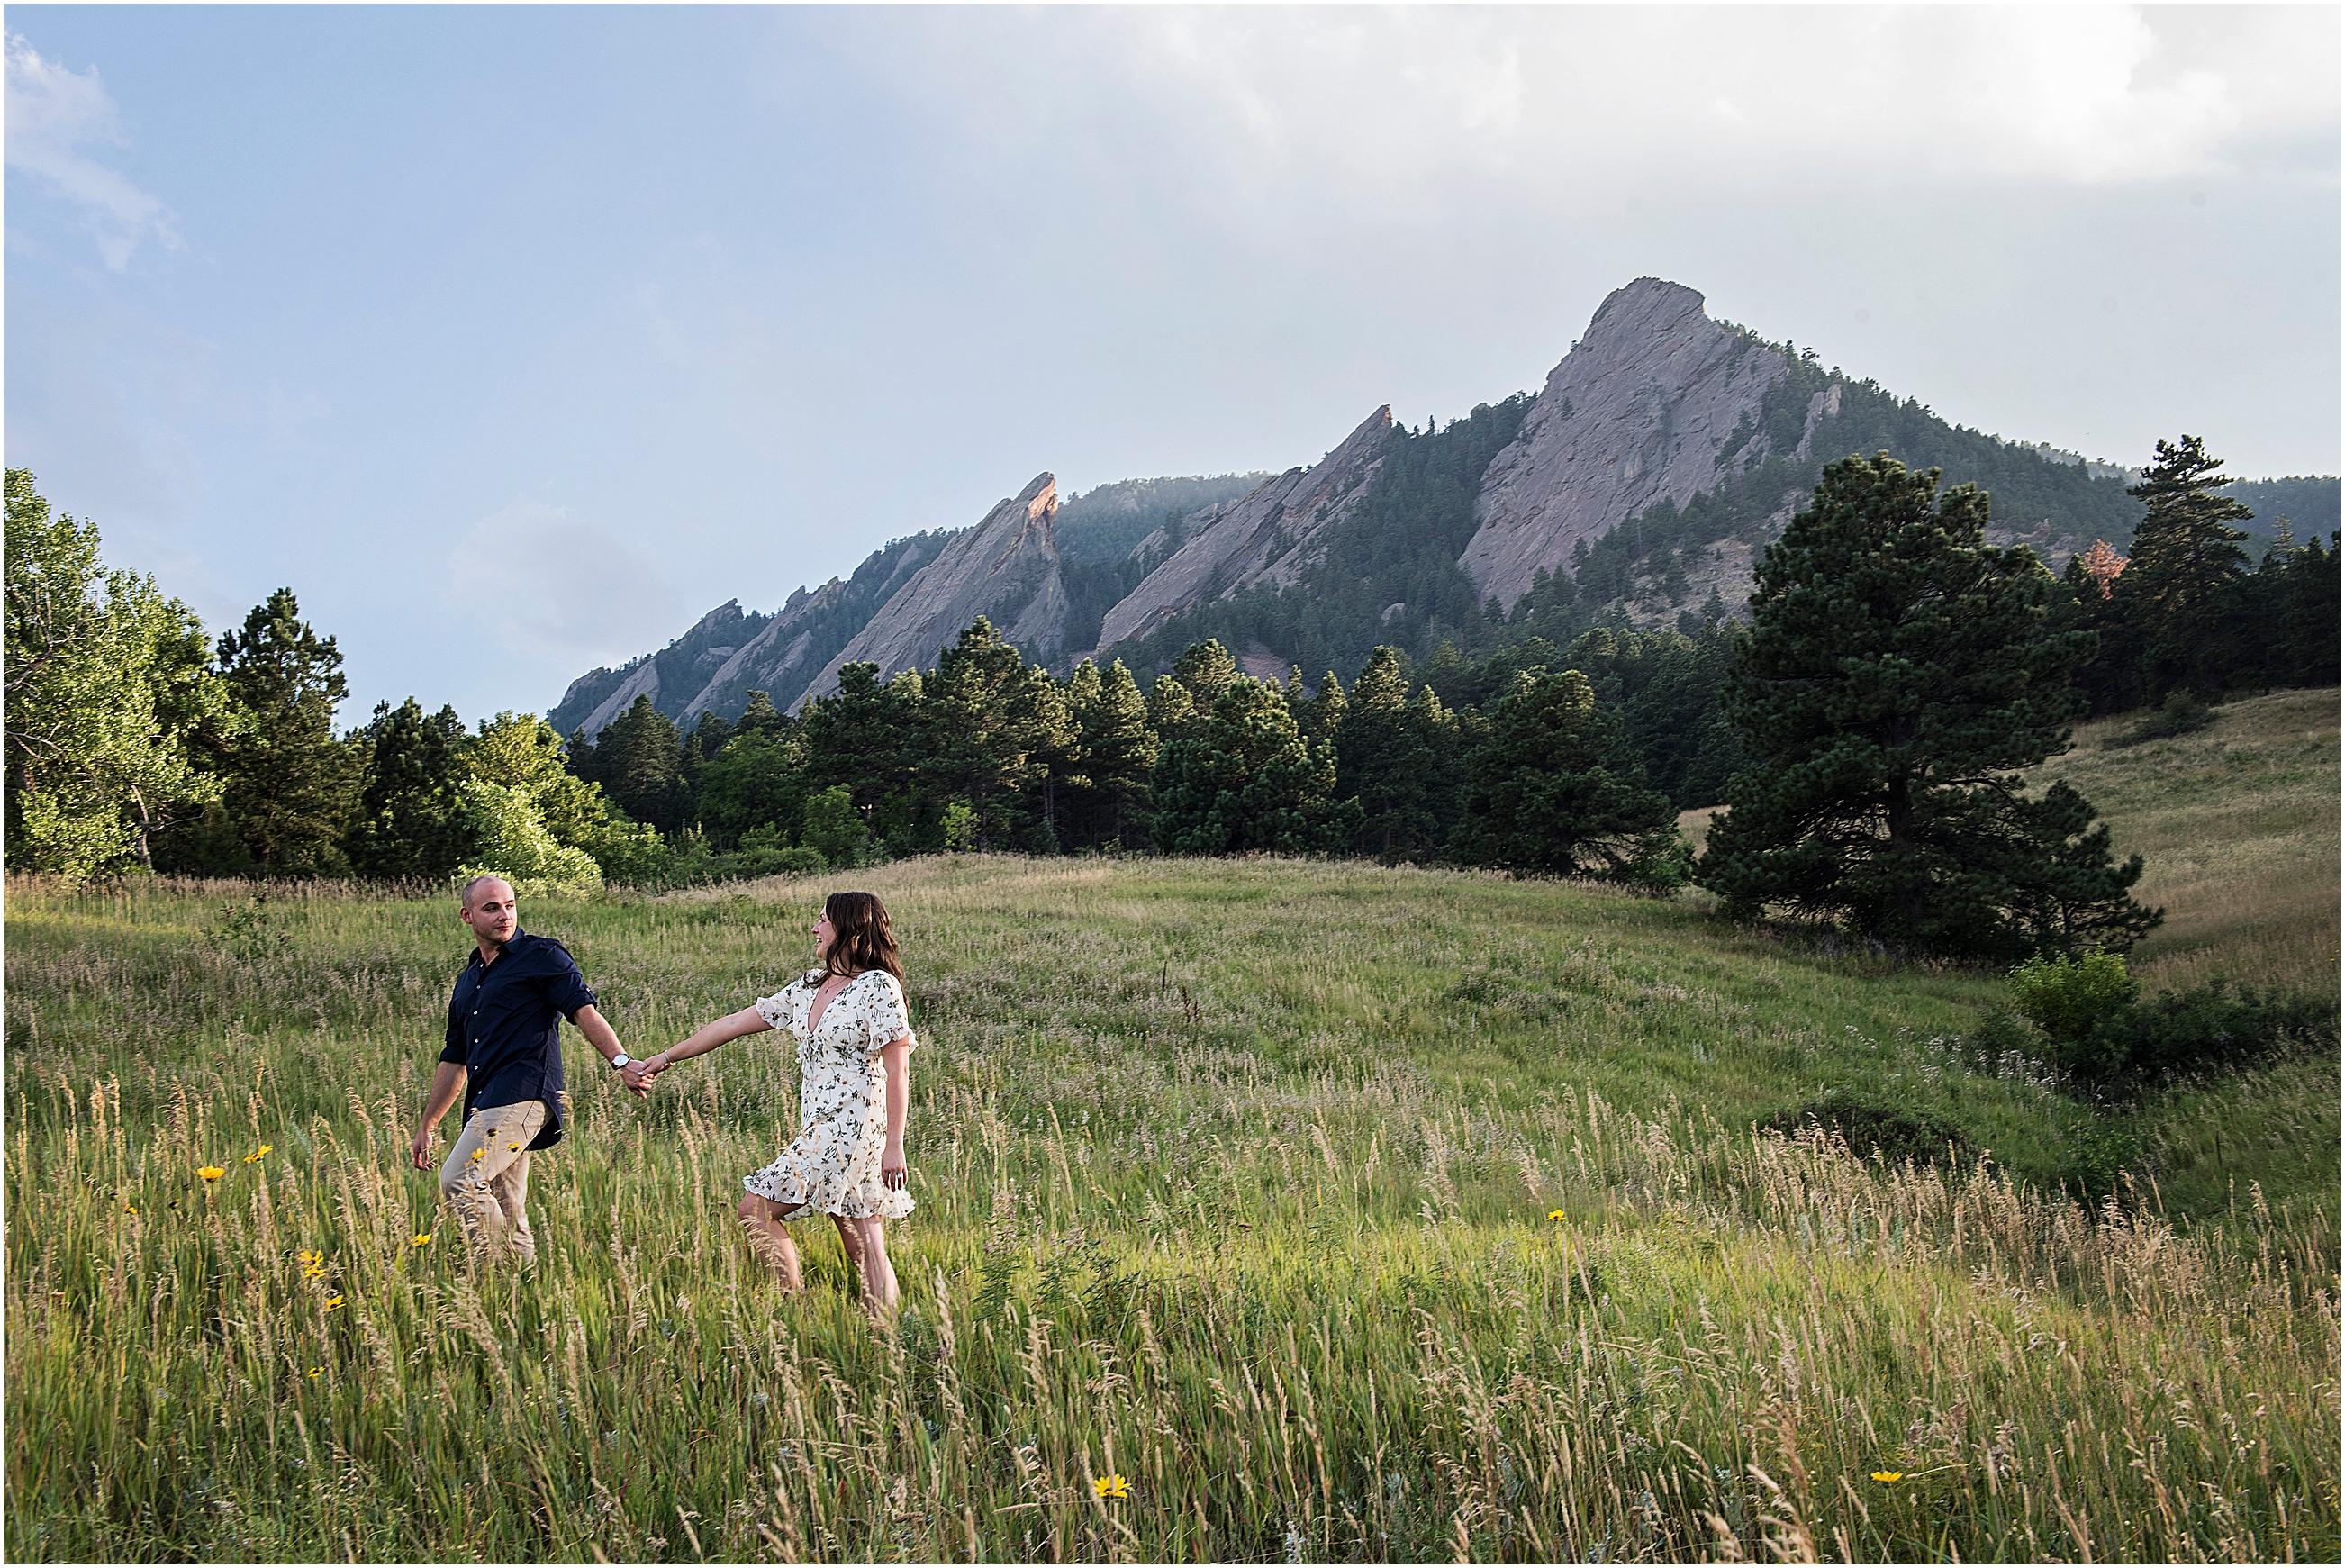 Man and woman walking in a meadow with Chautauqua Flatirons behind them